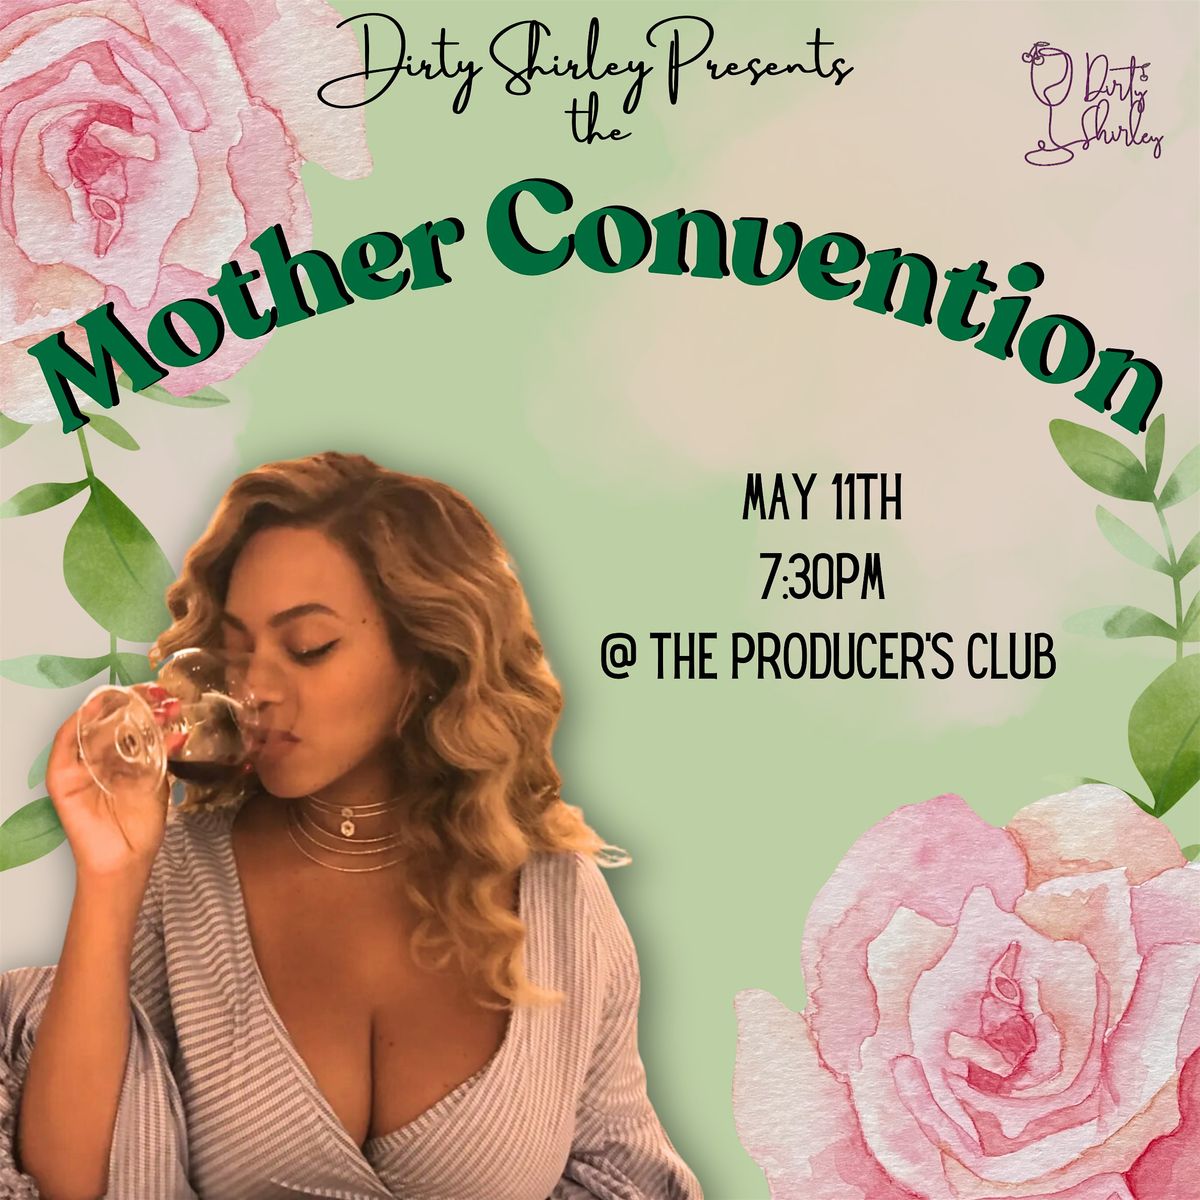 Dirty Shirley Presents: The Mother Convention